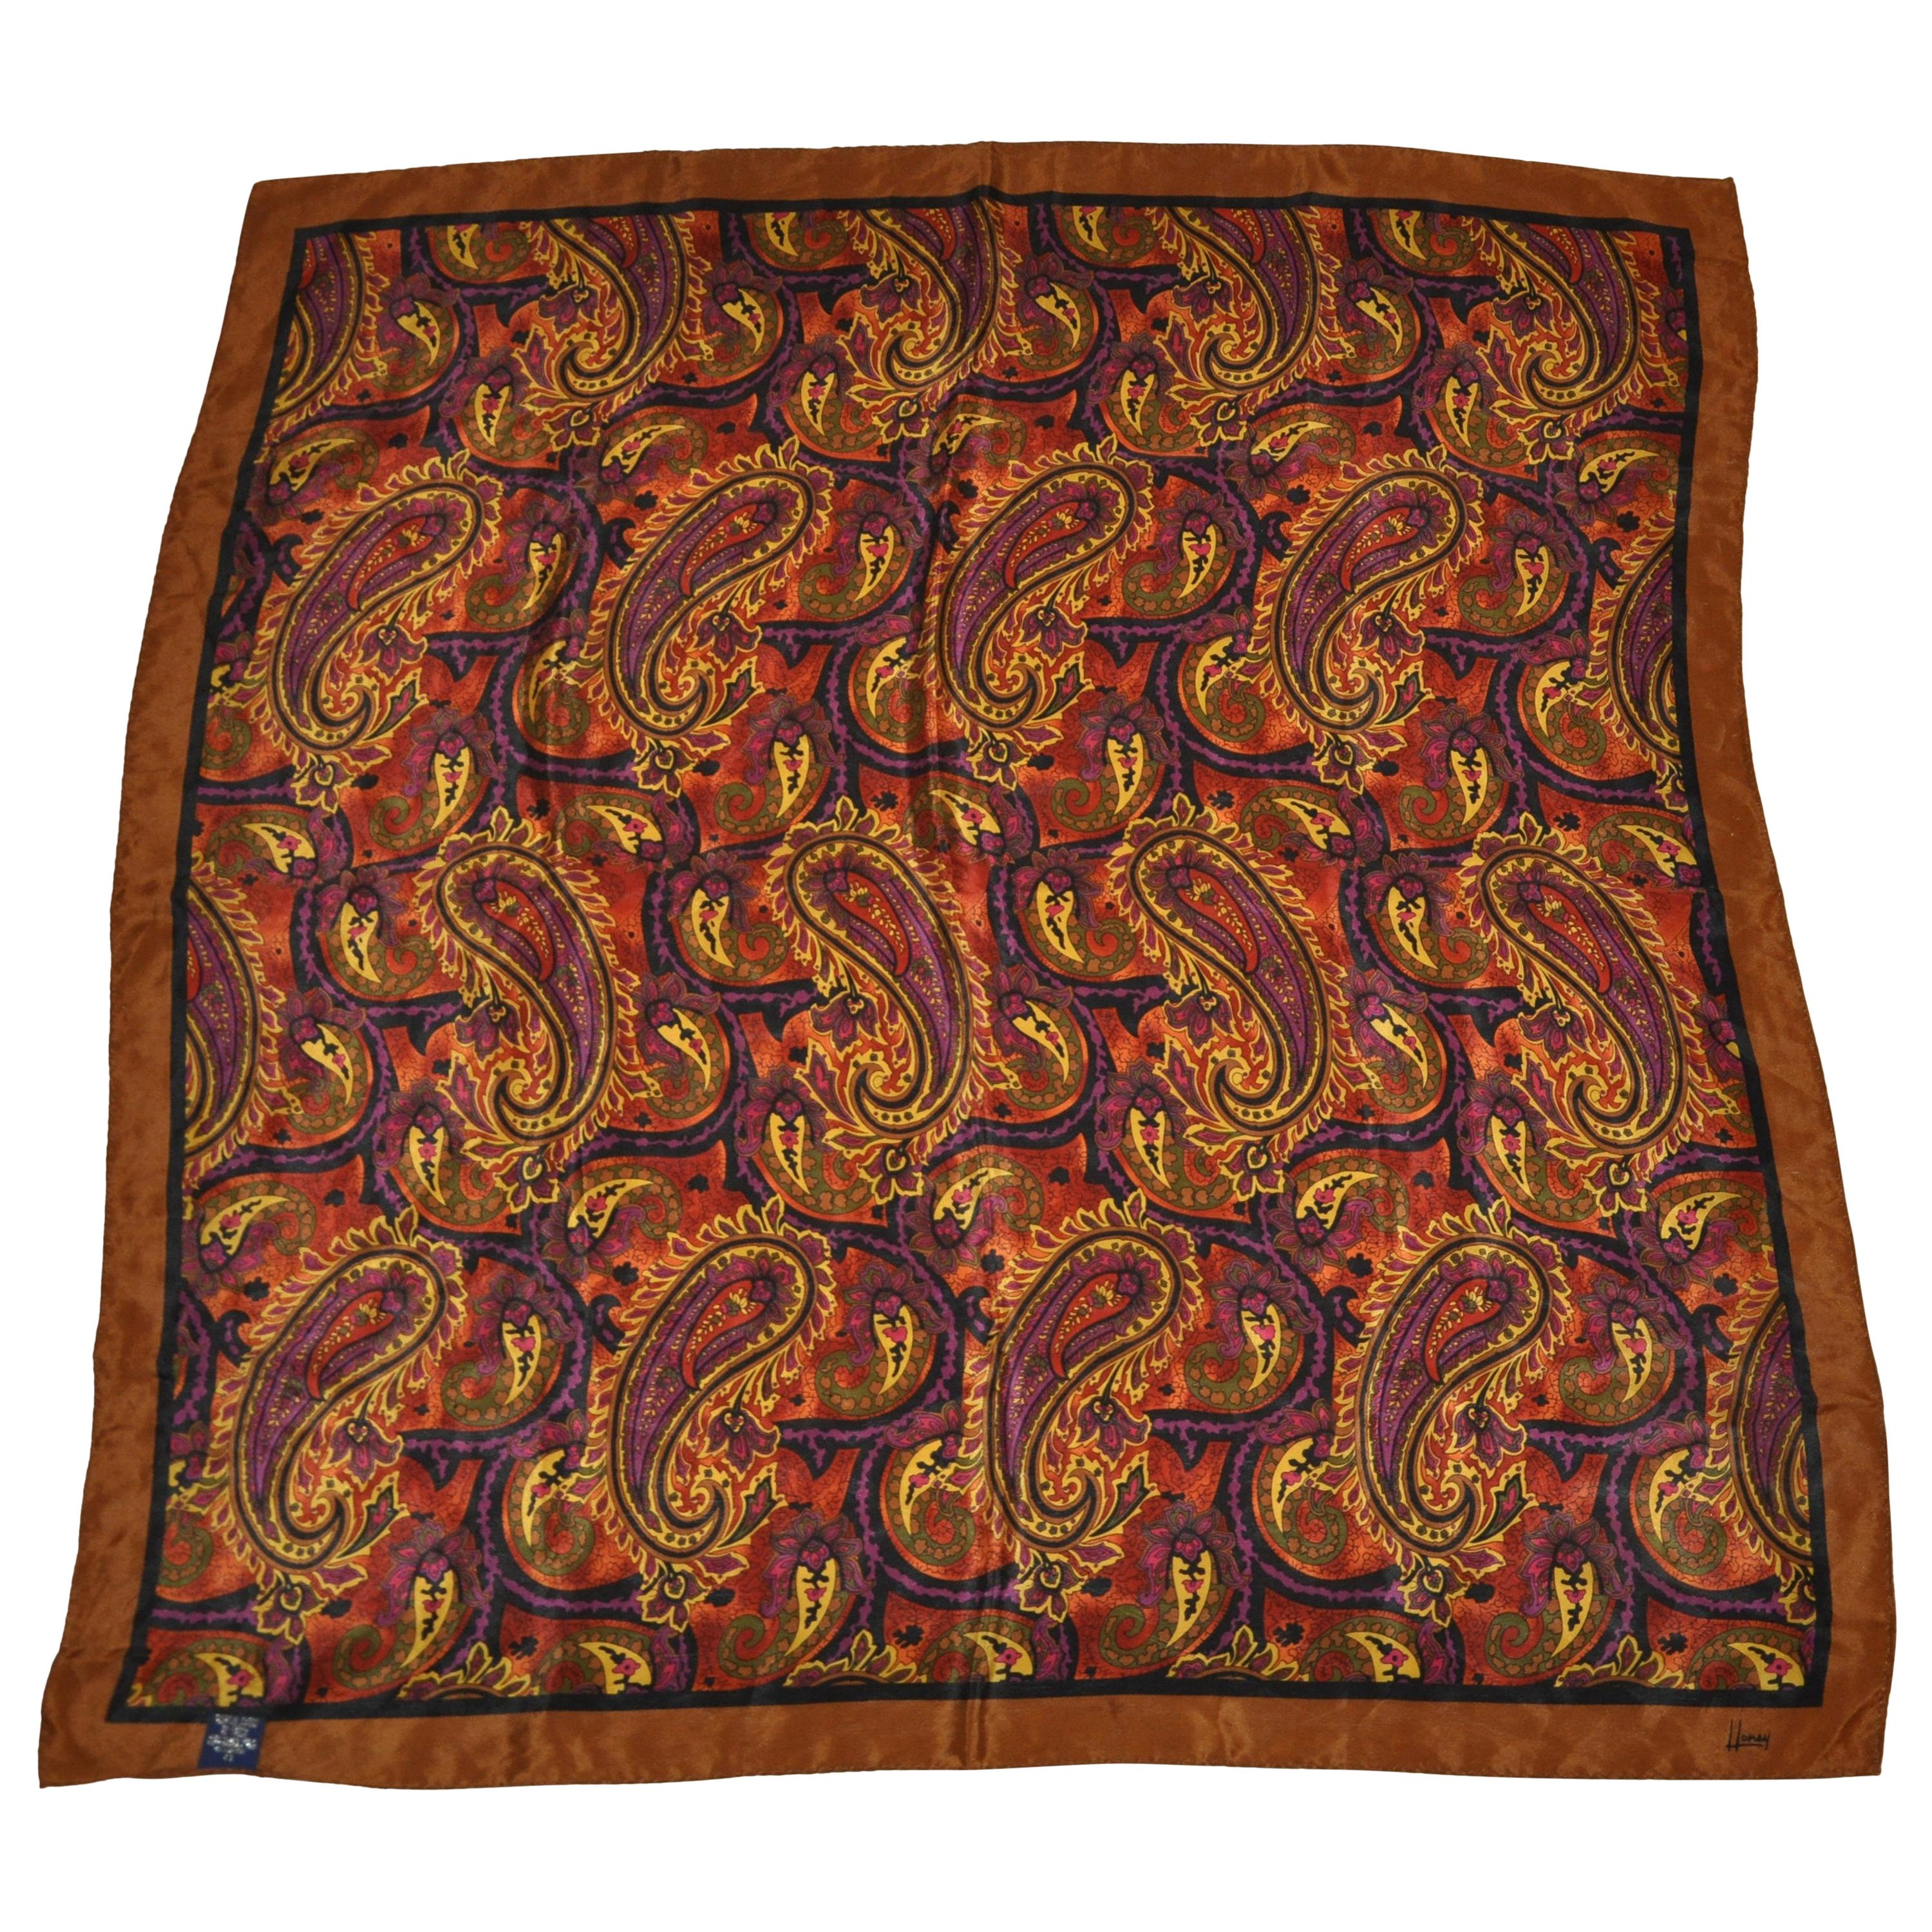 Honey Wonderfully Rich Hues of Browns Palseys with Brown Borders Silk Scarf